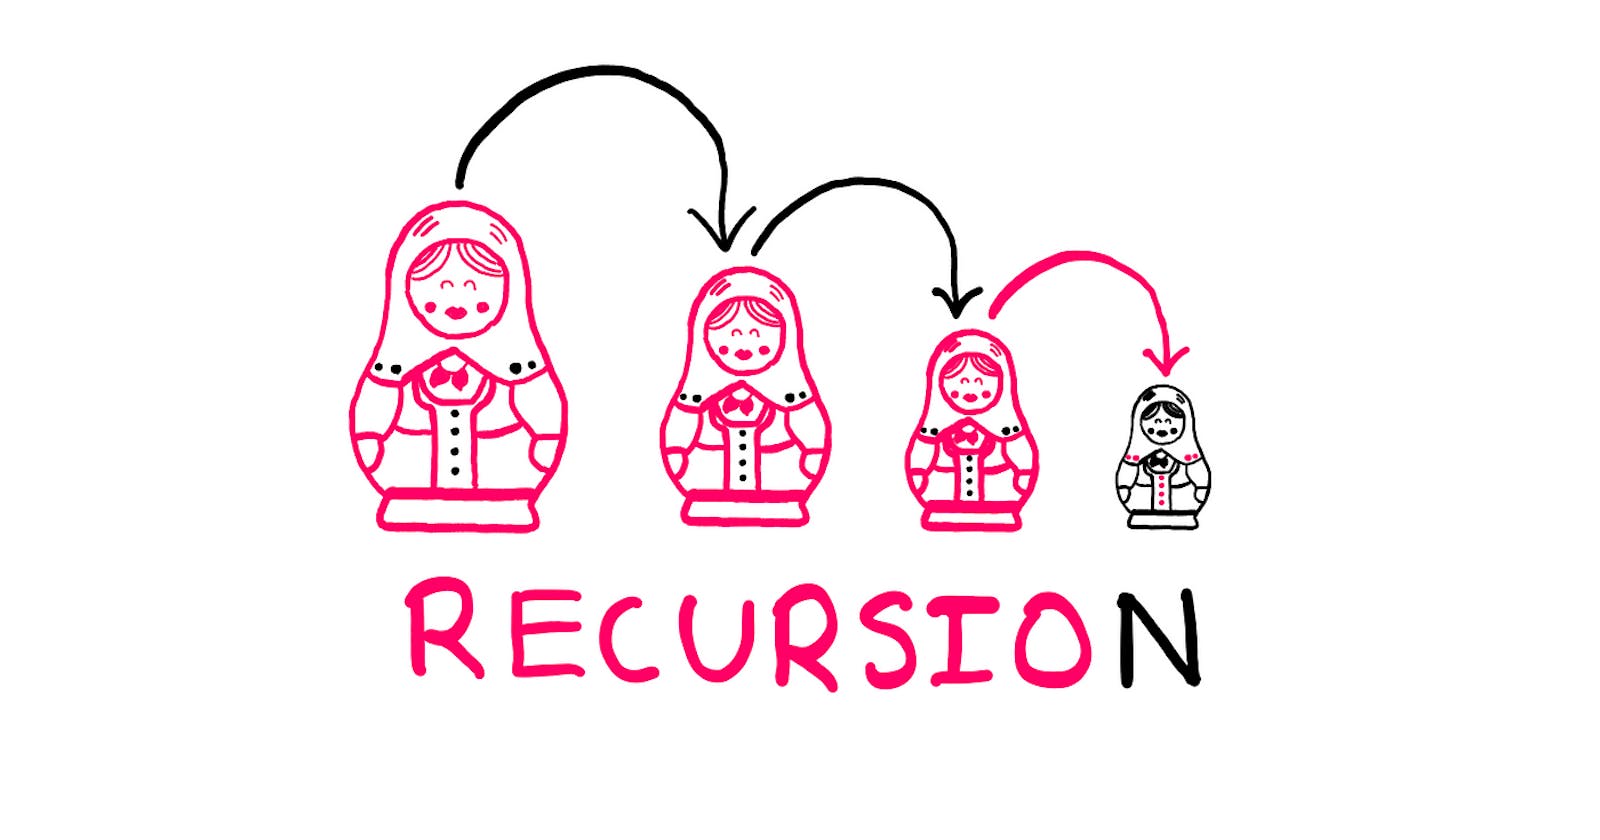 Mastering Recursion: Solving More Advanced Problems in C++